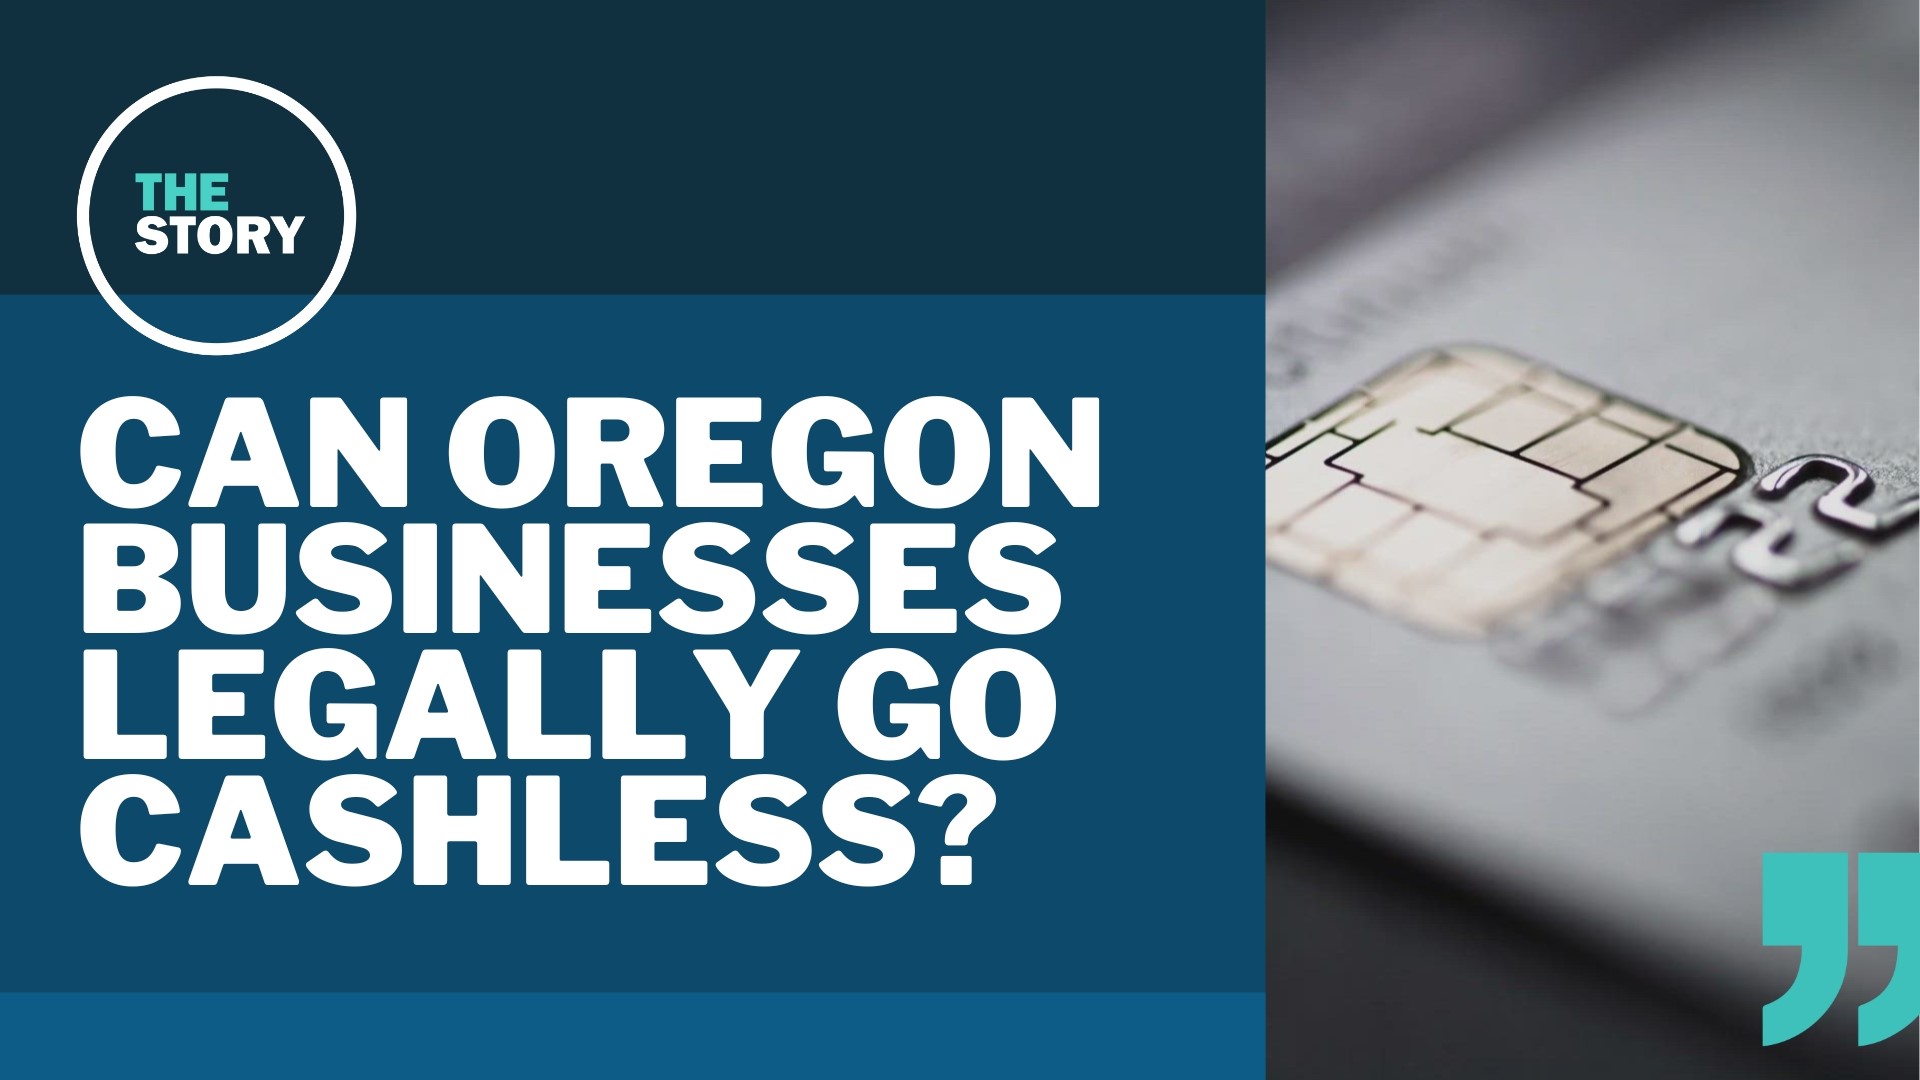 There are some exceptions, but most businesses will be in violation of Oregon law if they refuse to accept cash as payment for goods or services.